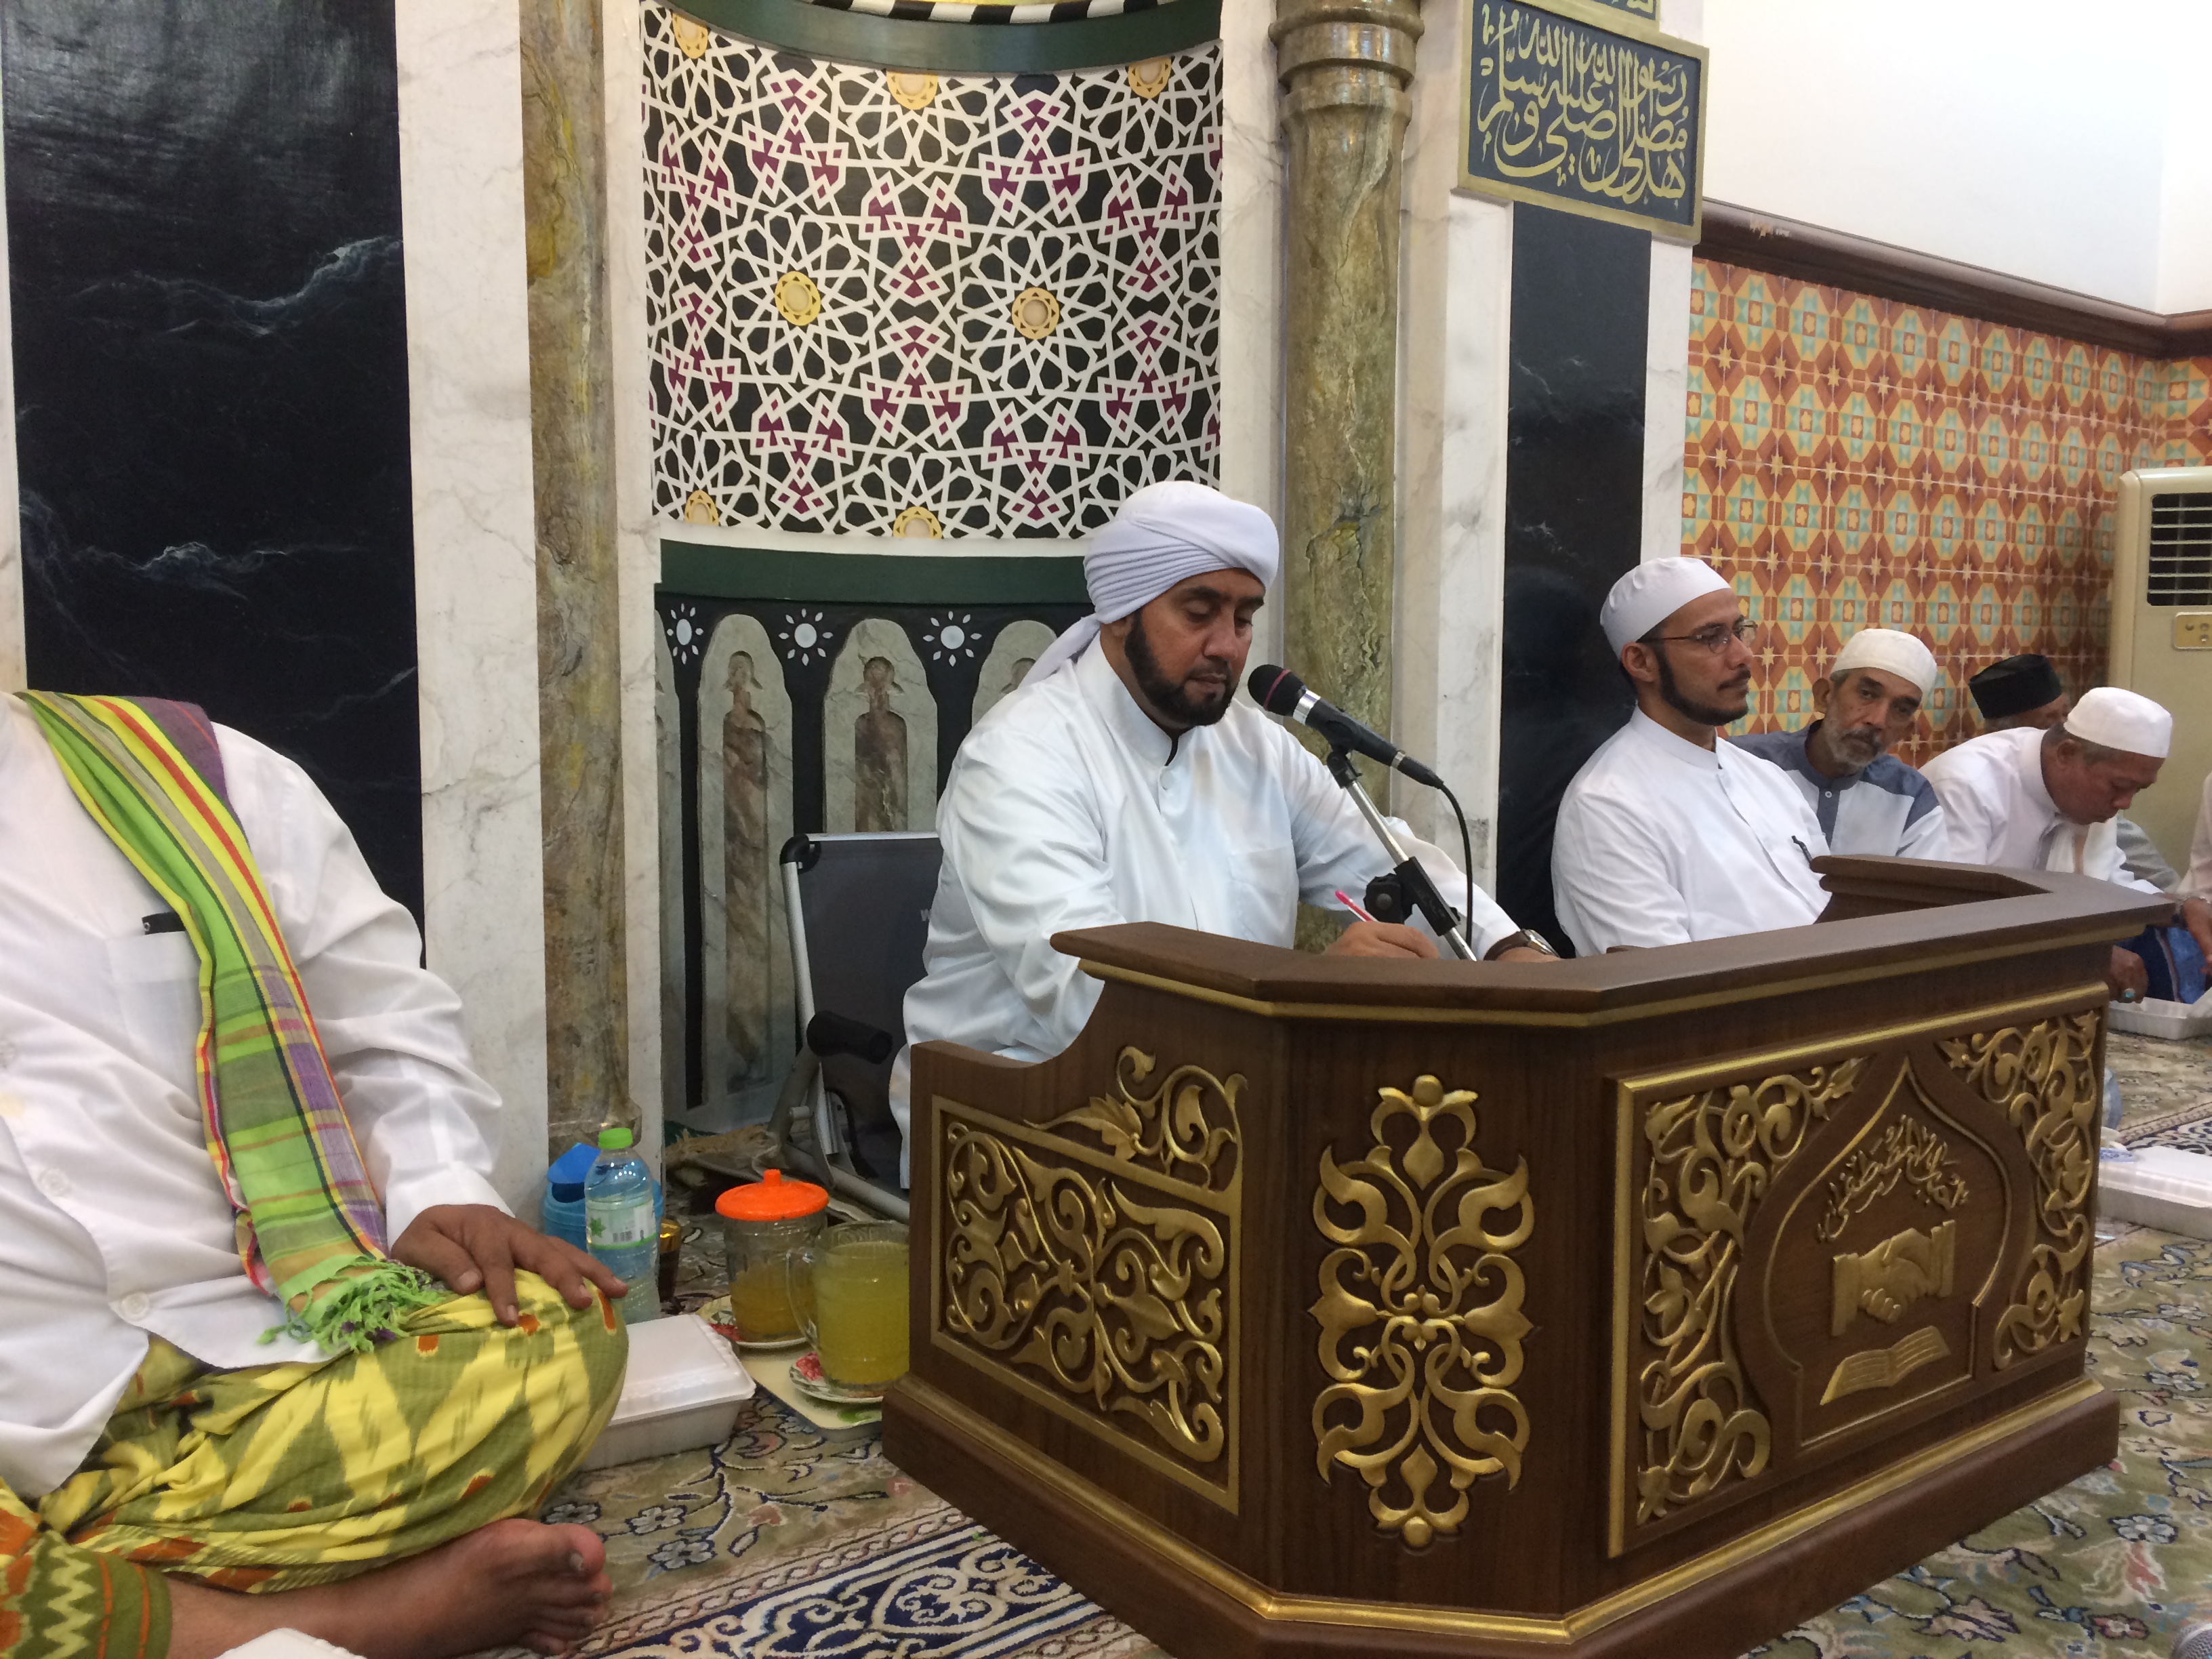 Habib Syeh (center) at his 'pulpit' in the 'private' chamber in front of the main hall area.